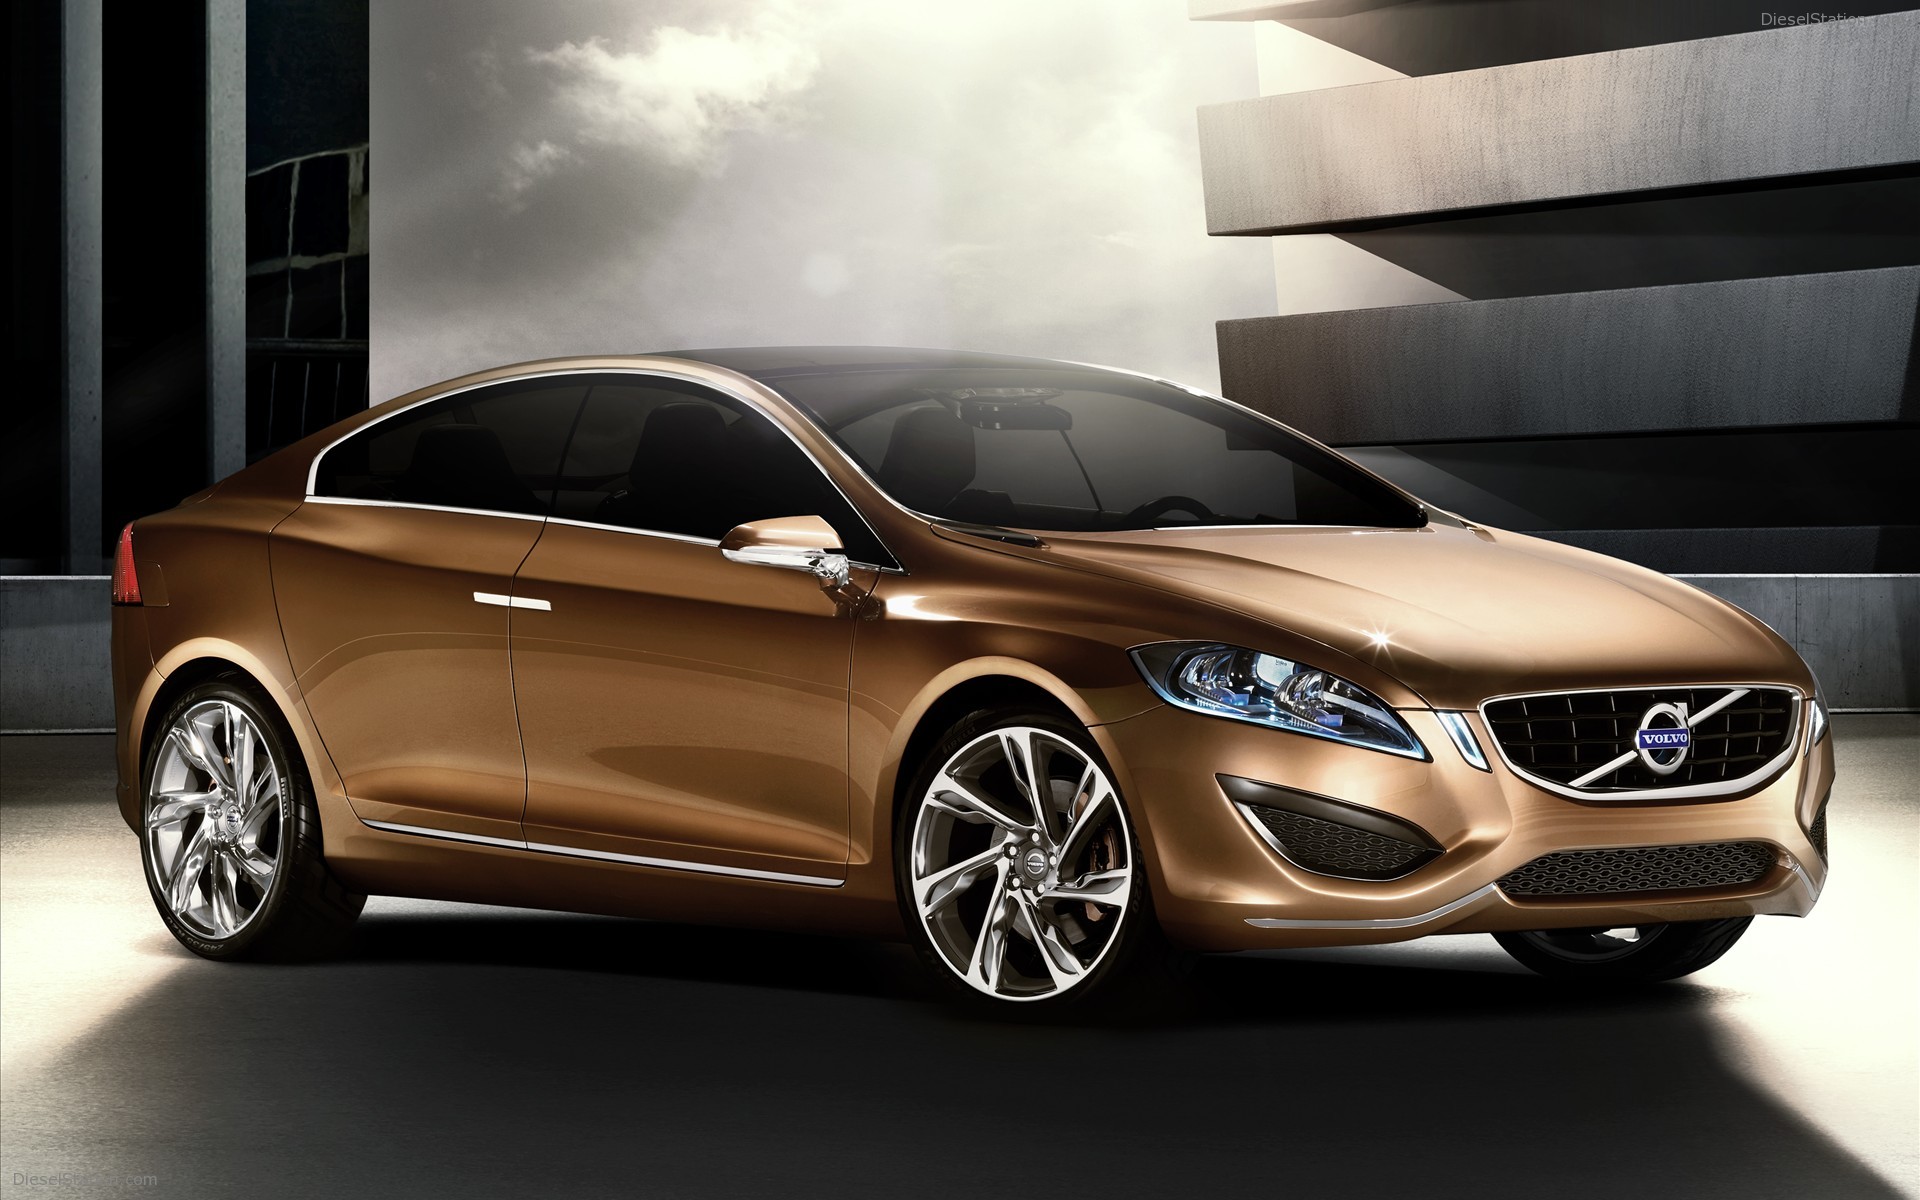 The Next-Generation Volvo S60 Concept. Published On : Jan 13, 2009